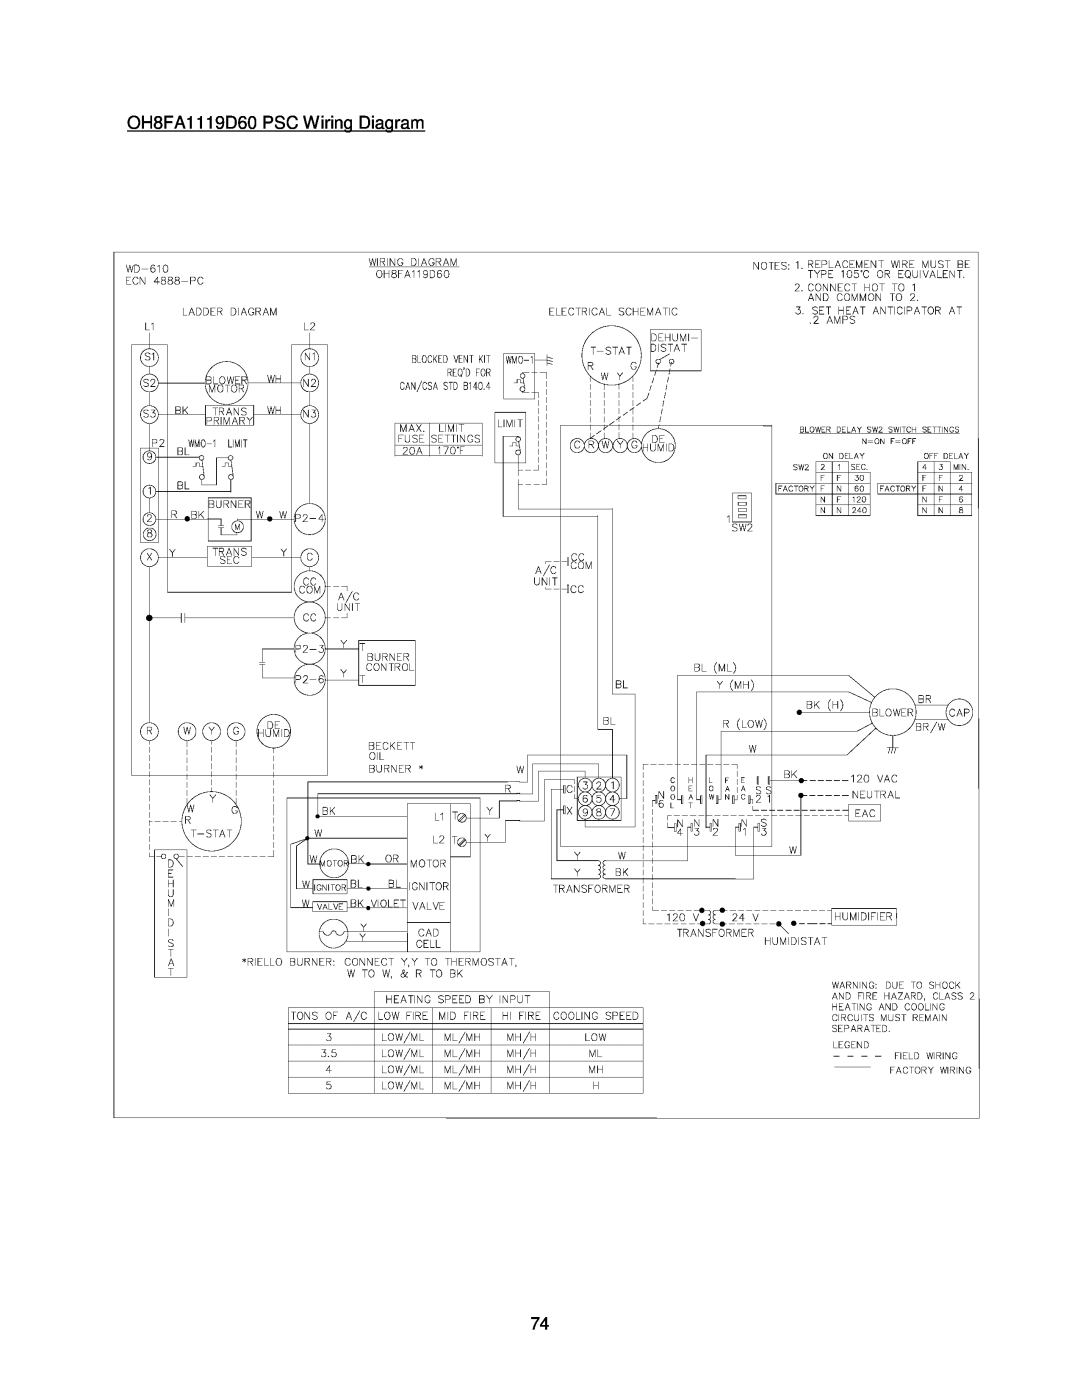 Thermo Products OHFA199DV5R, OHFA199DV5B operation manual OH8FA1119D60 PSC Wiring Diagram 